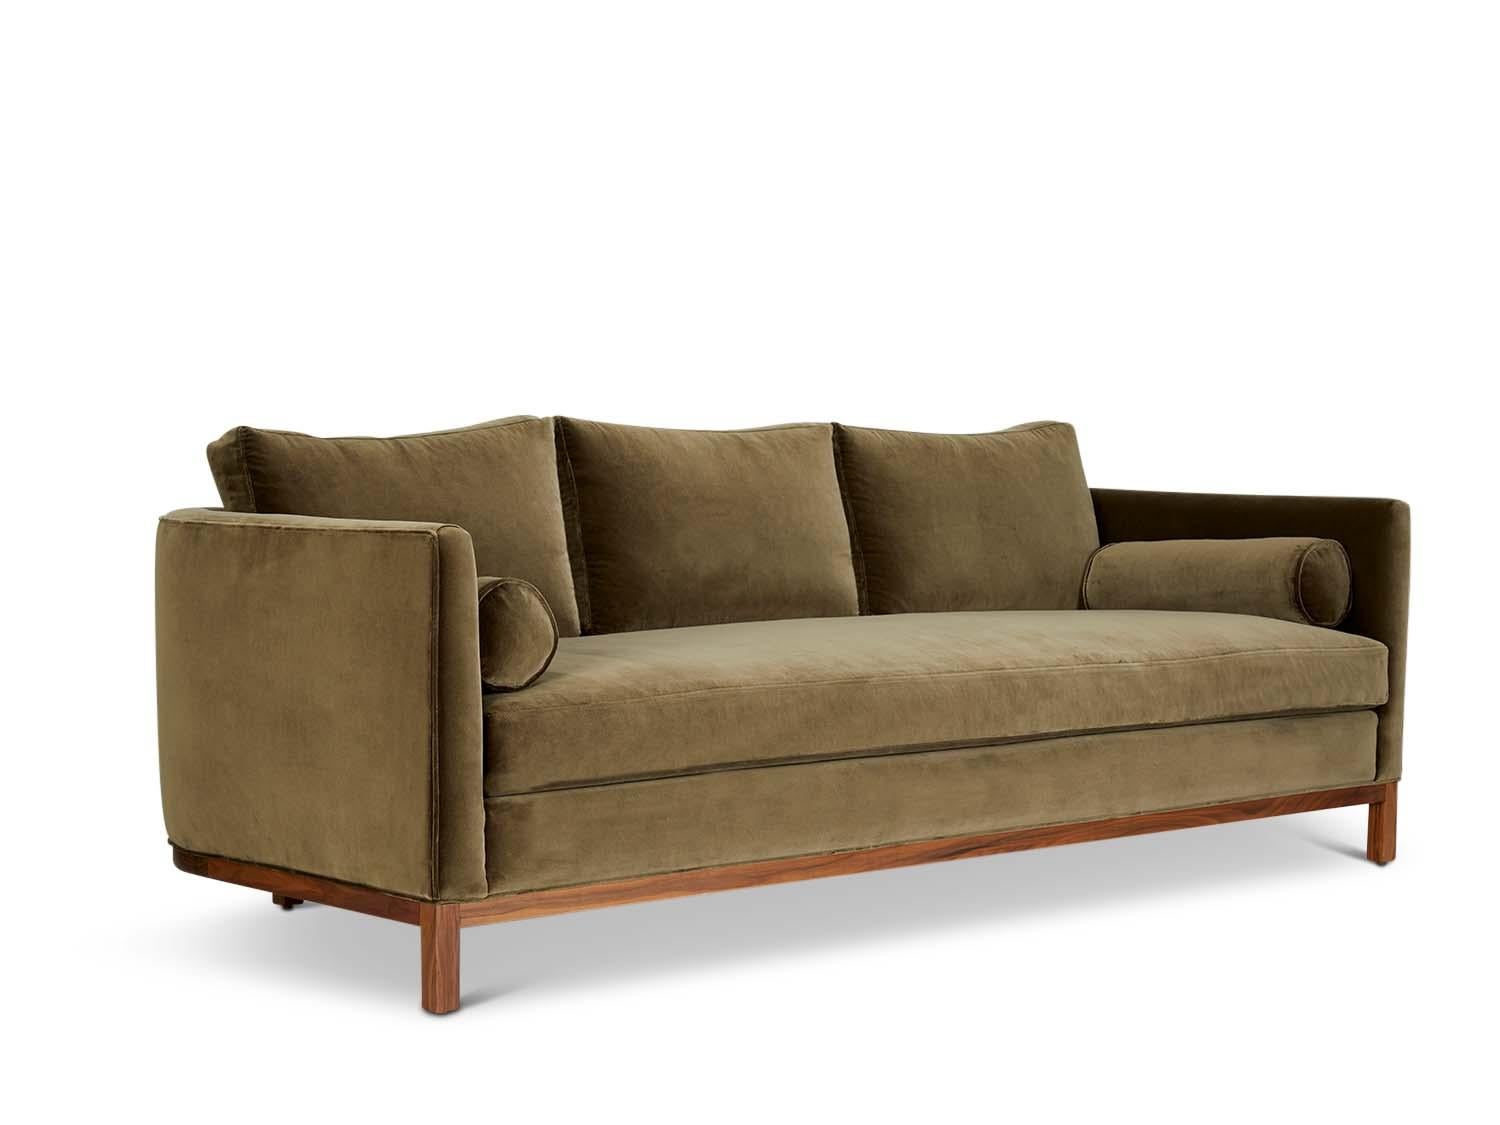 The curved back sofa is a tuxedo style sofa with curved corners and features a single down-wrapped, seat cushion with 3 down-wrapped, removable back cushions and two bolsters. The base can be made in American walnut, white oak or metal. 

The